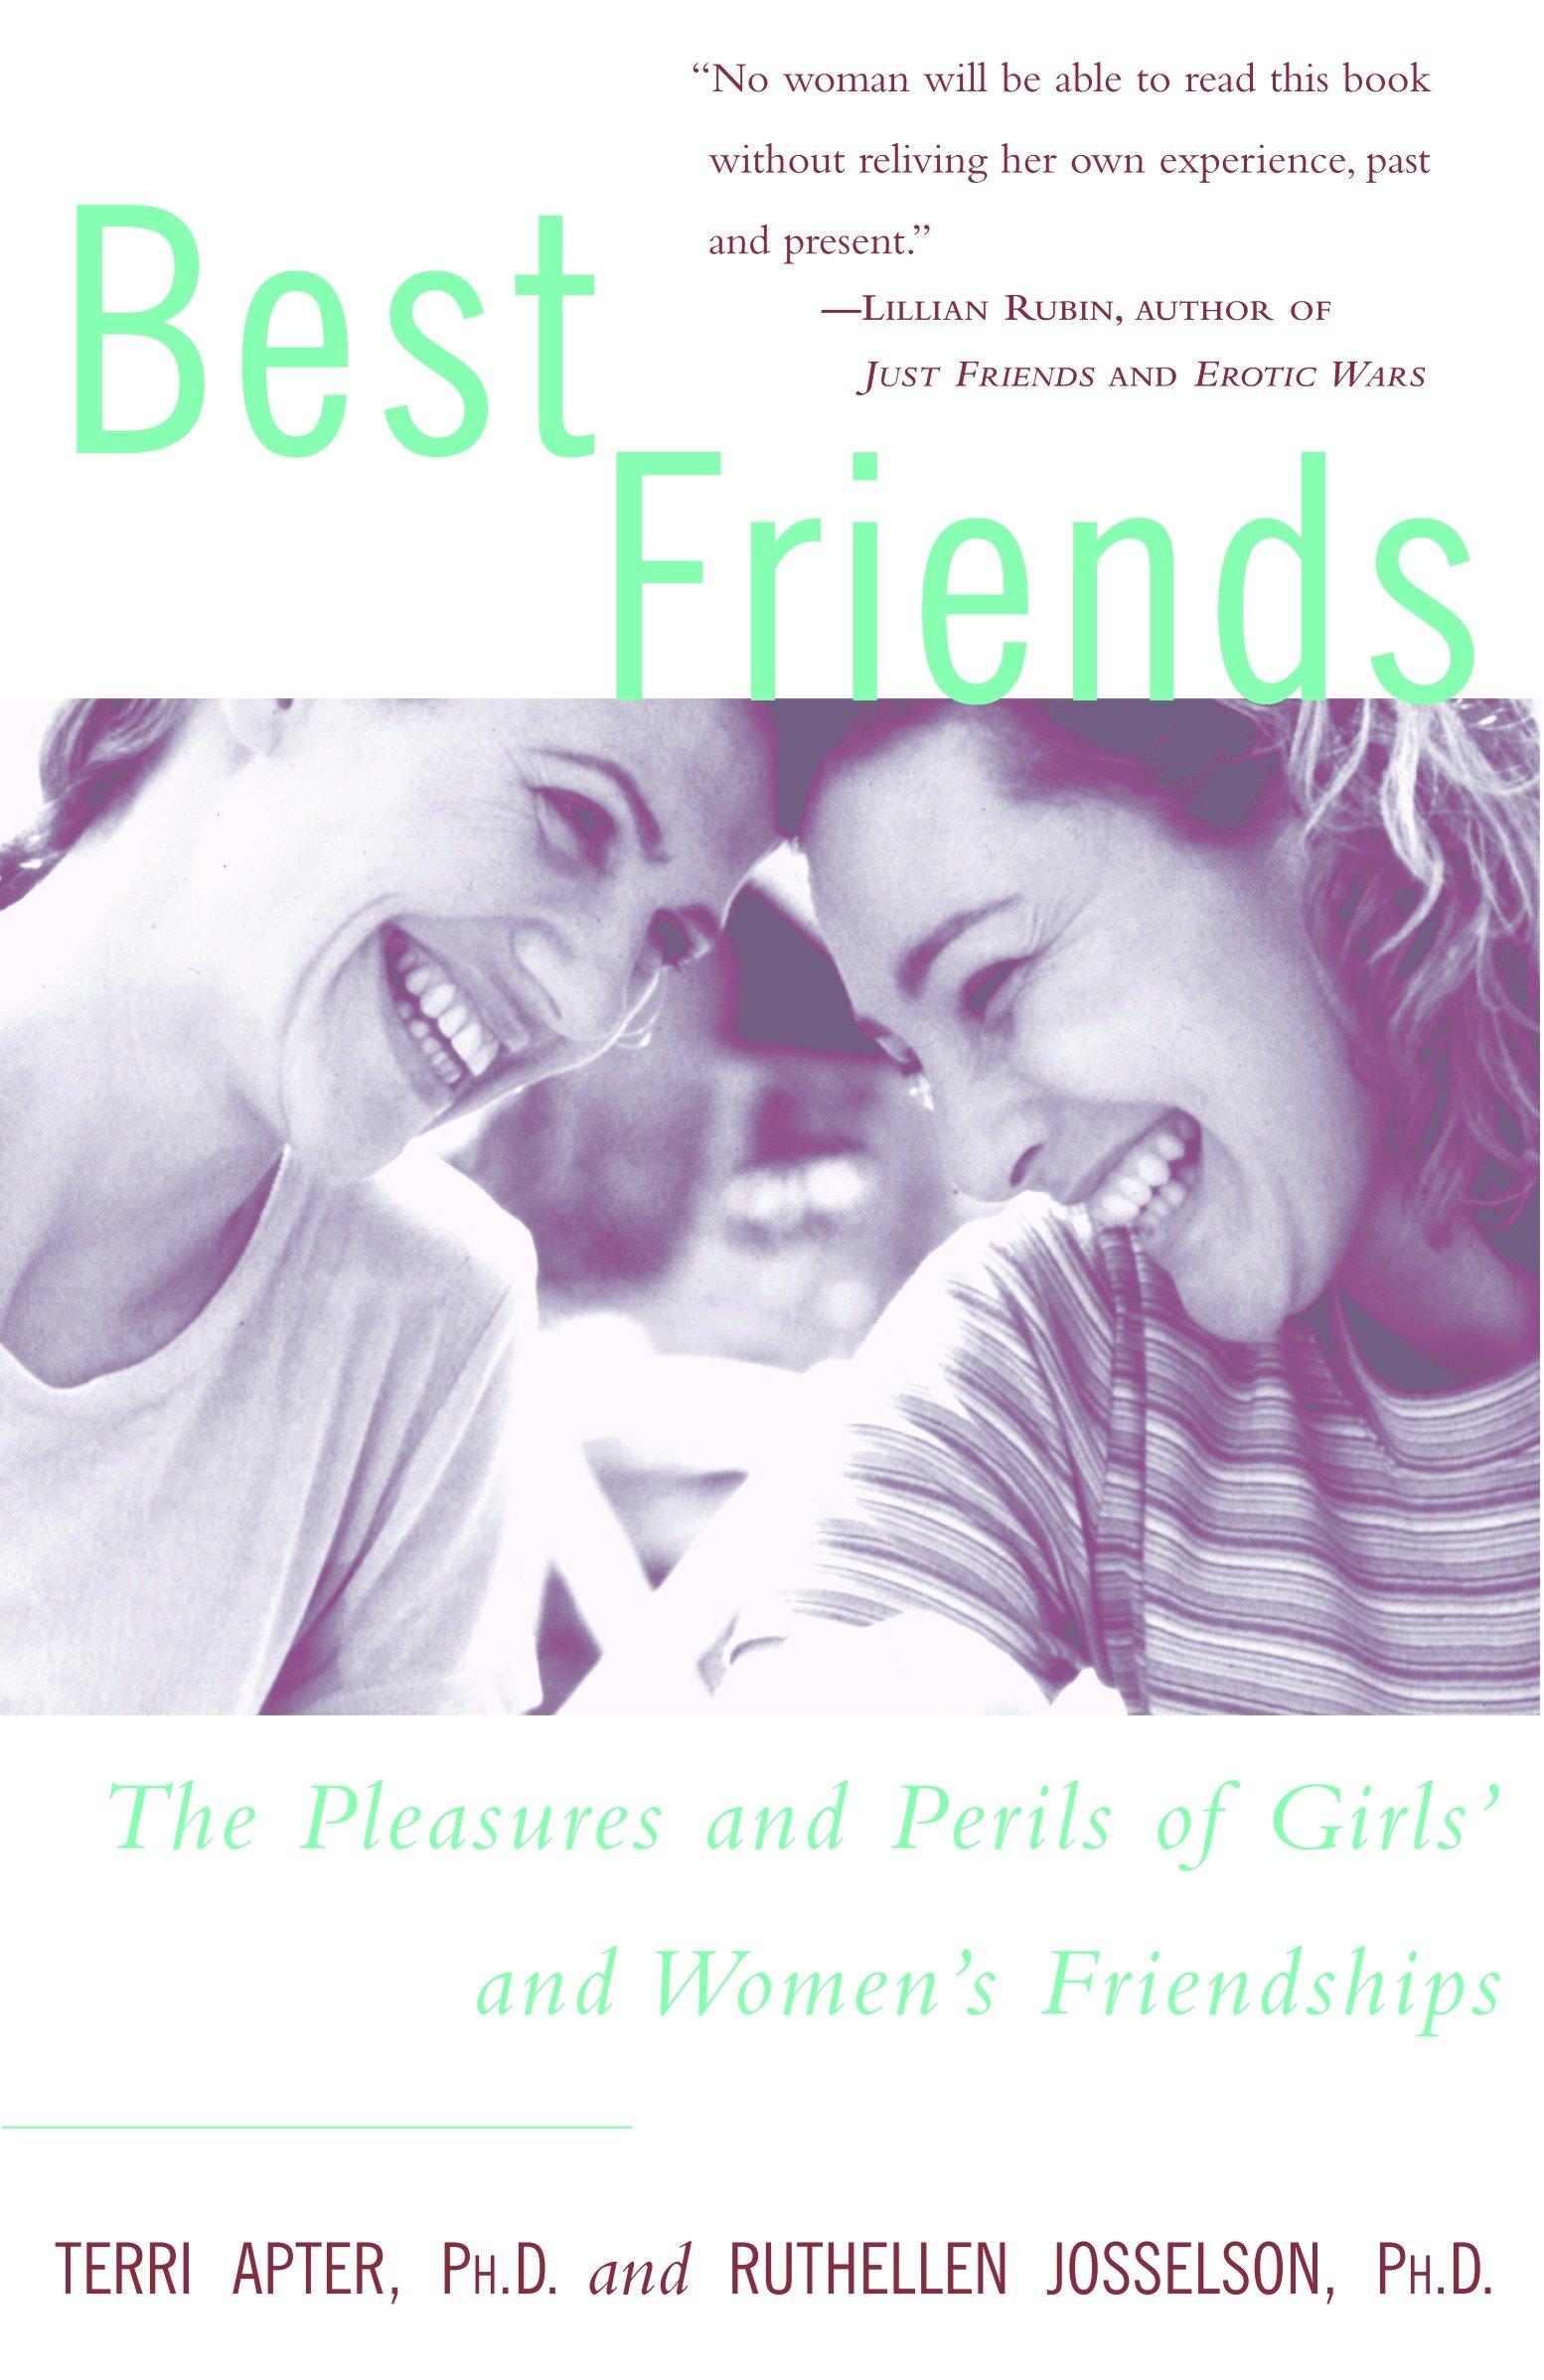 Reading my best friend. Books are my best friends. Books about good best friends.